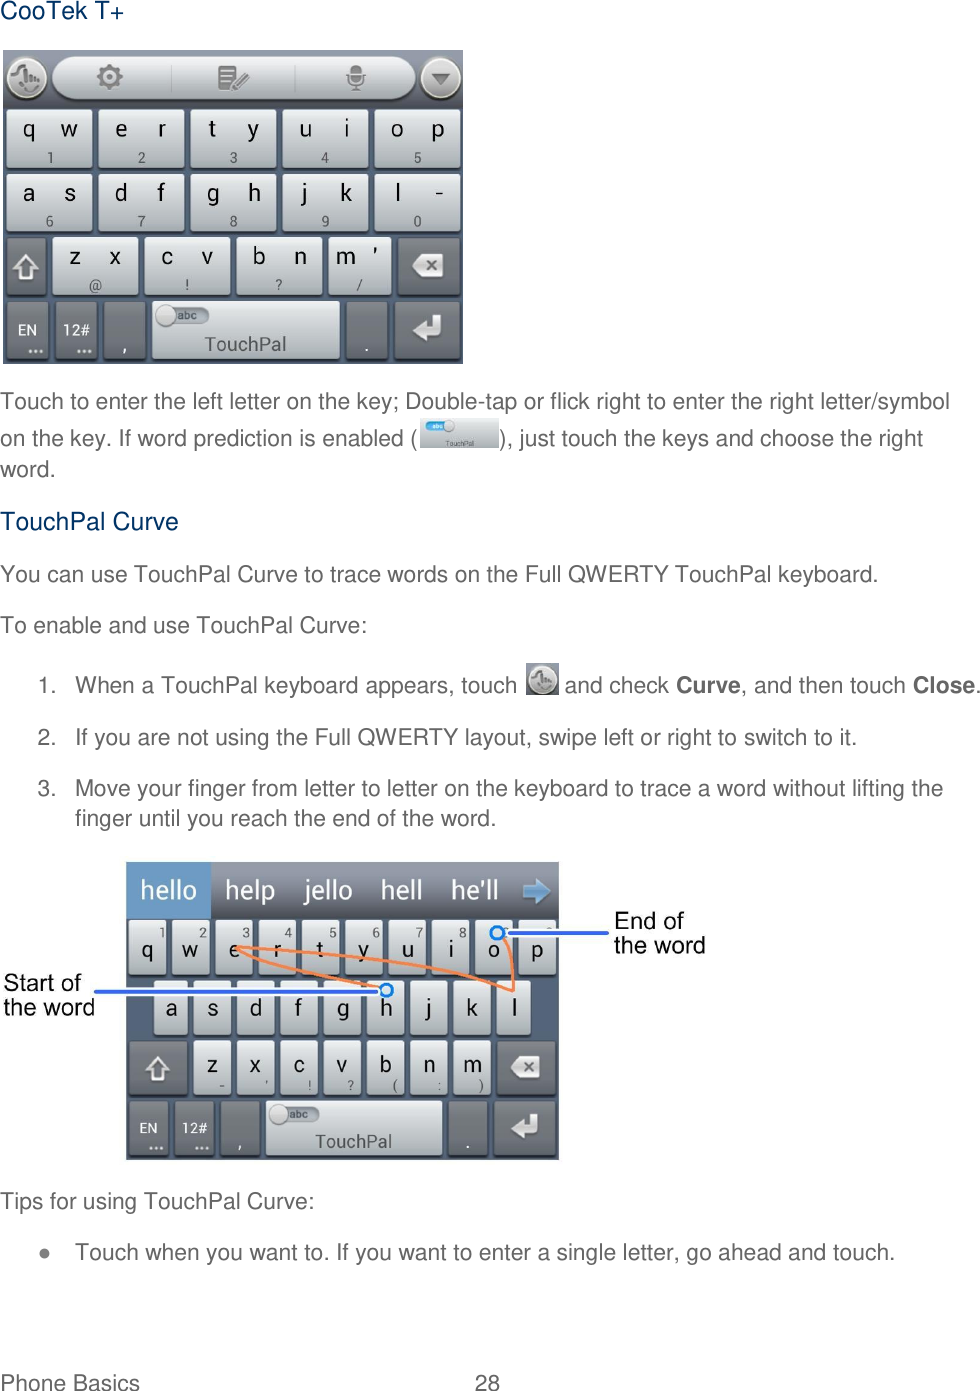 Phone Basics  28   CooTek T+  Touch to enter the left letter on the key; Double-tap or flick right to enter the right letter/symbol on the key. If word prediction is enabled ( ), just touch the keys and choose the right word. TouchPal Curve You can use TouchPal Curve to trace words on the Full QWERTY TouchPal keyboard. To enable and use TouchPal Curve: 1.  When a TouchPal keyboard appears, touch   and check Curve, and then touch Close. 2.  If you are not using the Full QWERTY layout, swipe left or right to switch to it. 3.  Move your finger from letter to letter on the keyboard to trace a word without lifting the finger until you reach the end of the word.  Tips for using TouchPal Curve: ● Touch when you want to. If you want to enter a single letter, go ahead and touch. 